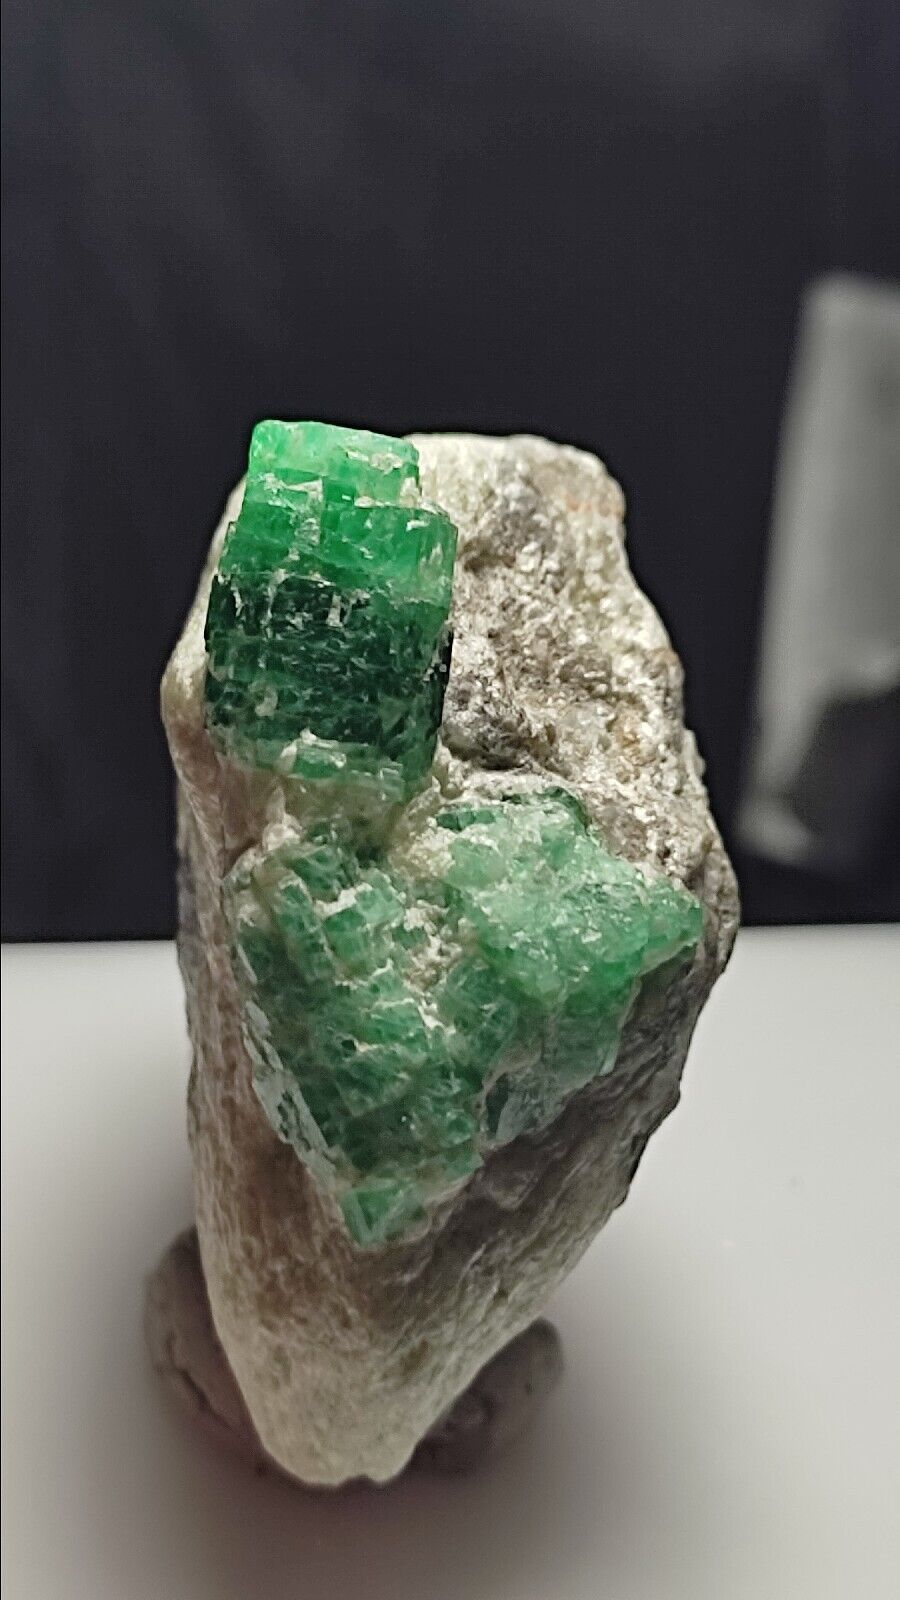 58gram Emerald crystal rough specimen collection peice from Swat Valley Pakistan